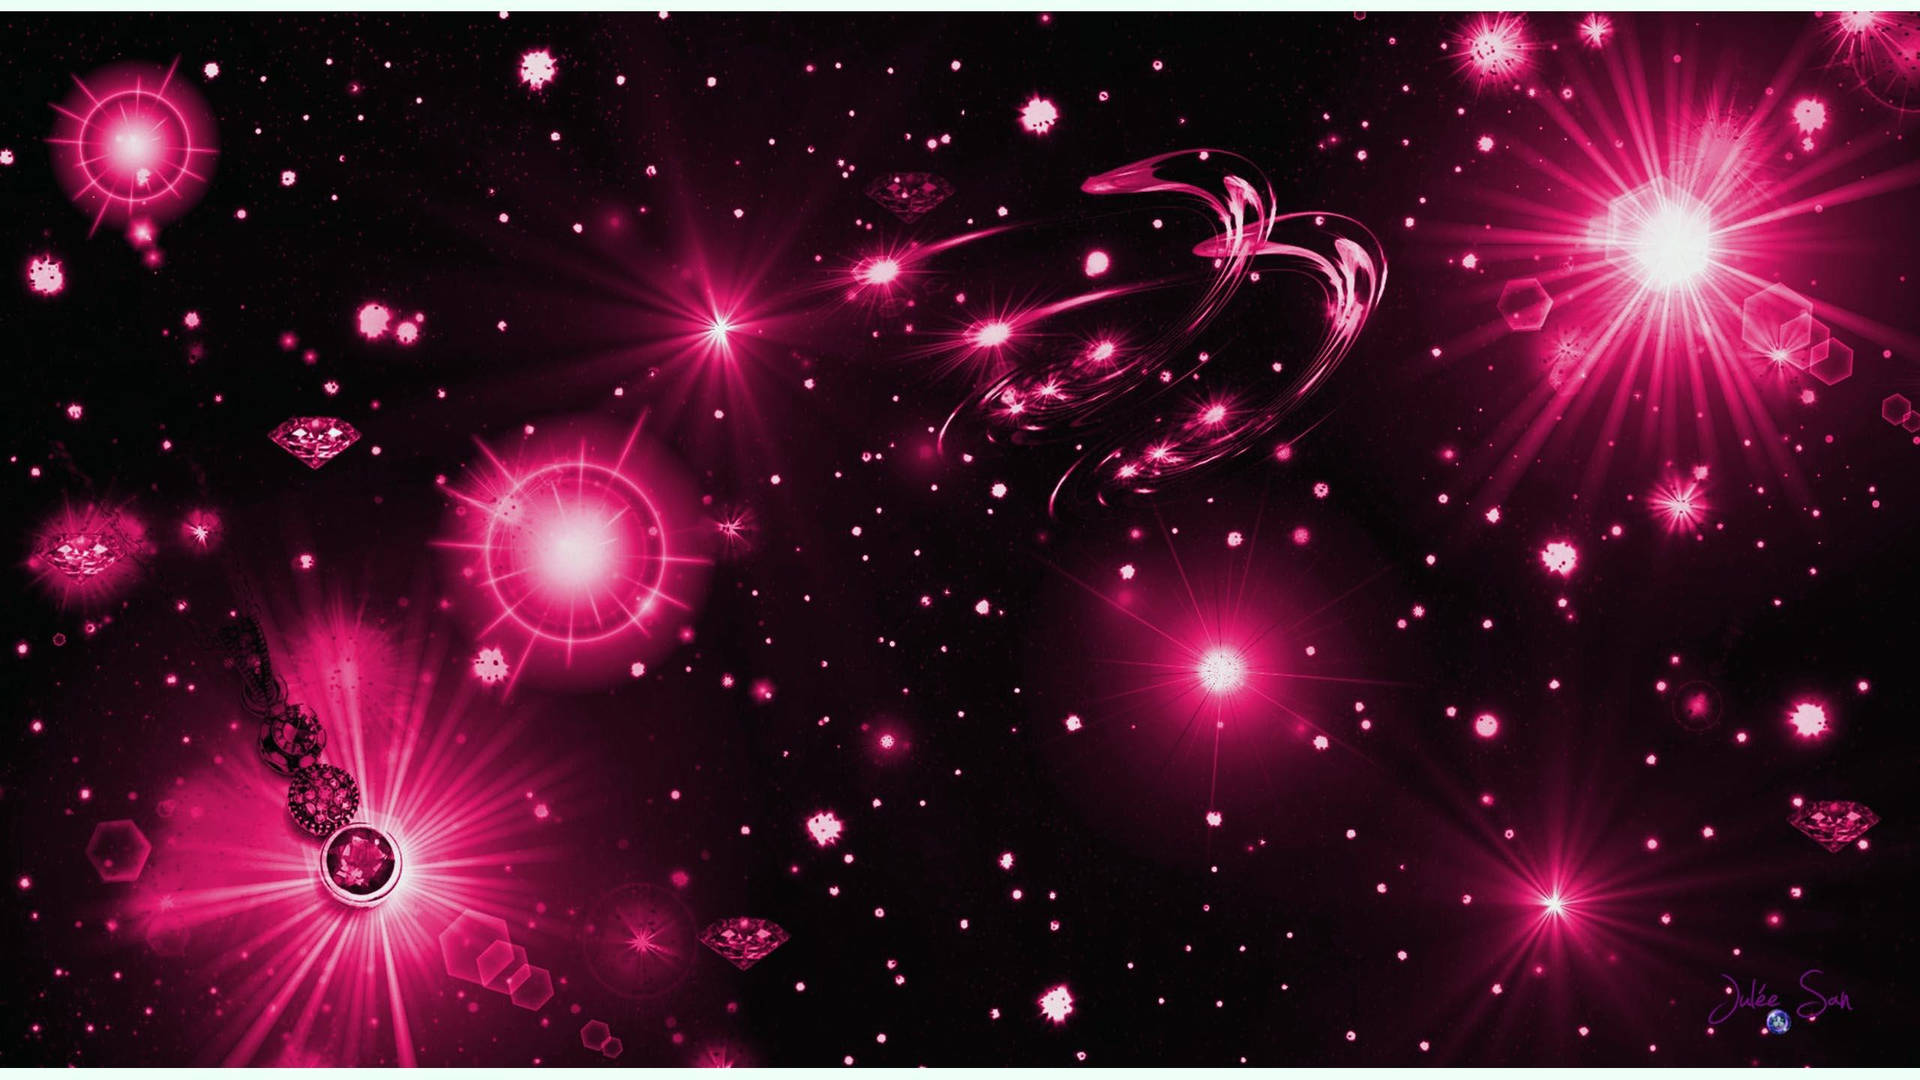 Hot Pink Celestial Bodies Background